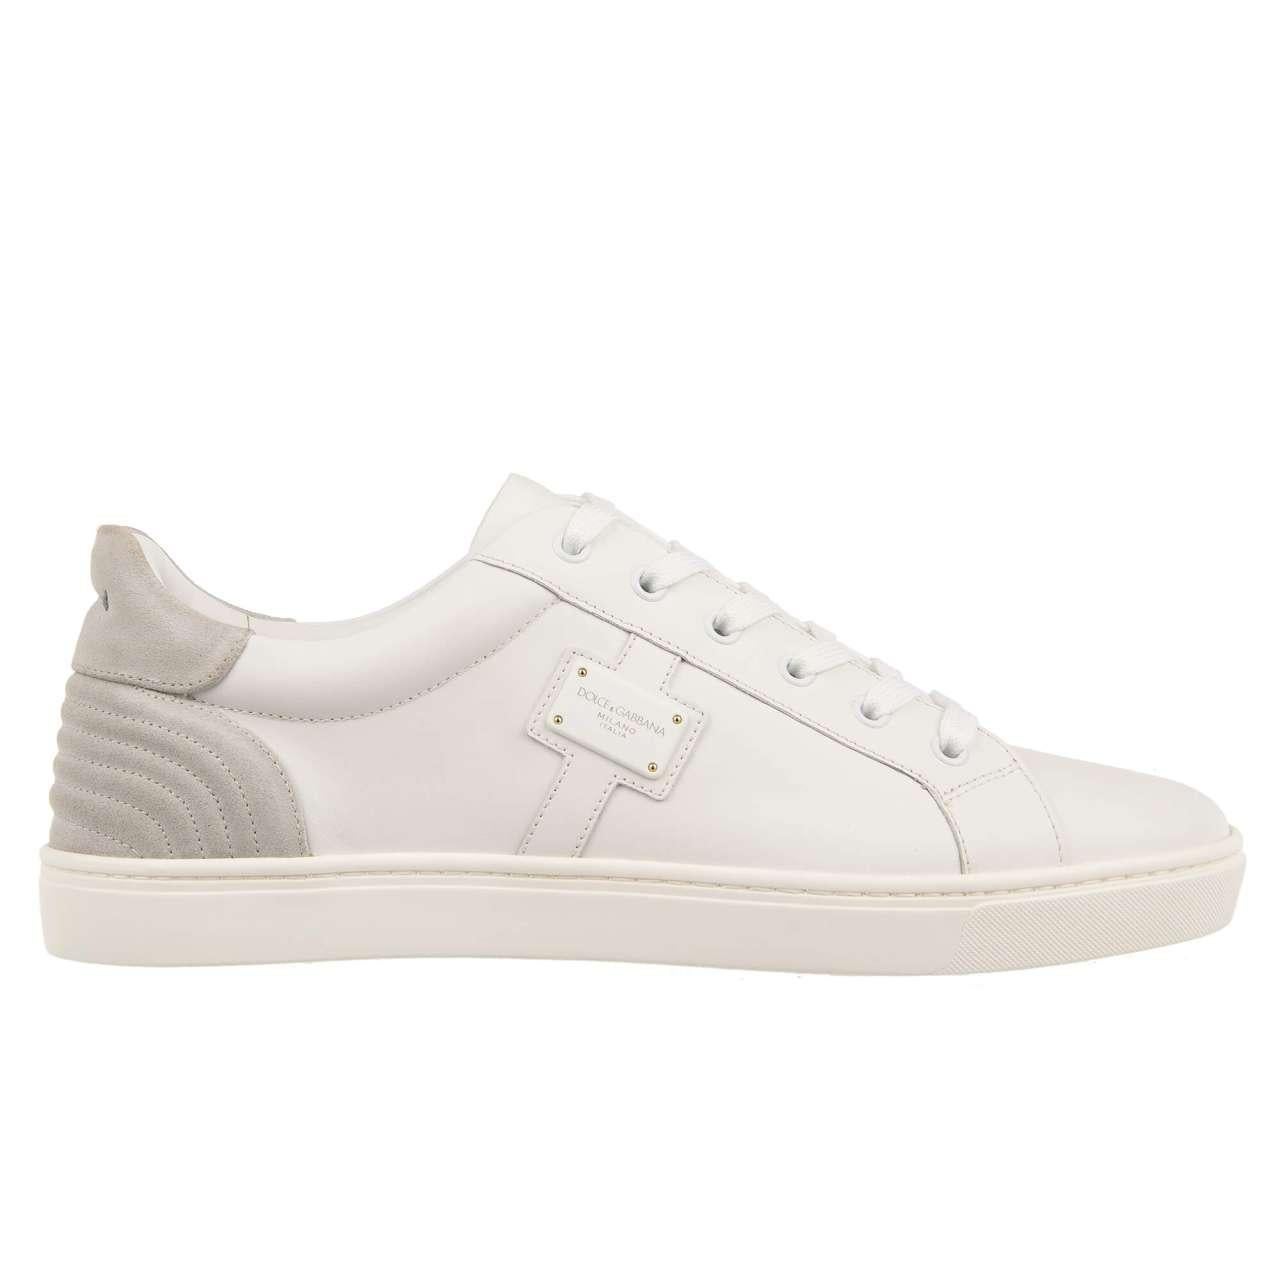 D&G Low-Top Sneaker LONDON with DG Logo Plate White Gray 41 UK 7 US 8 For Sale